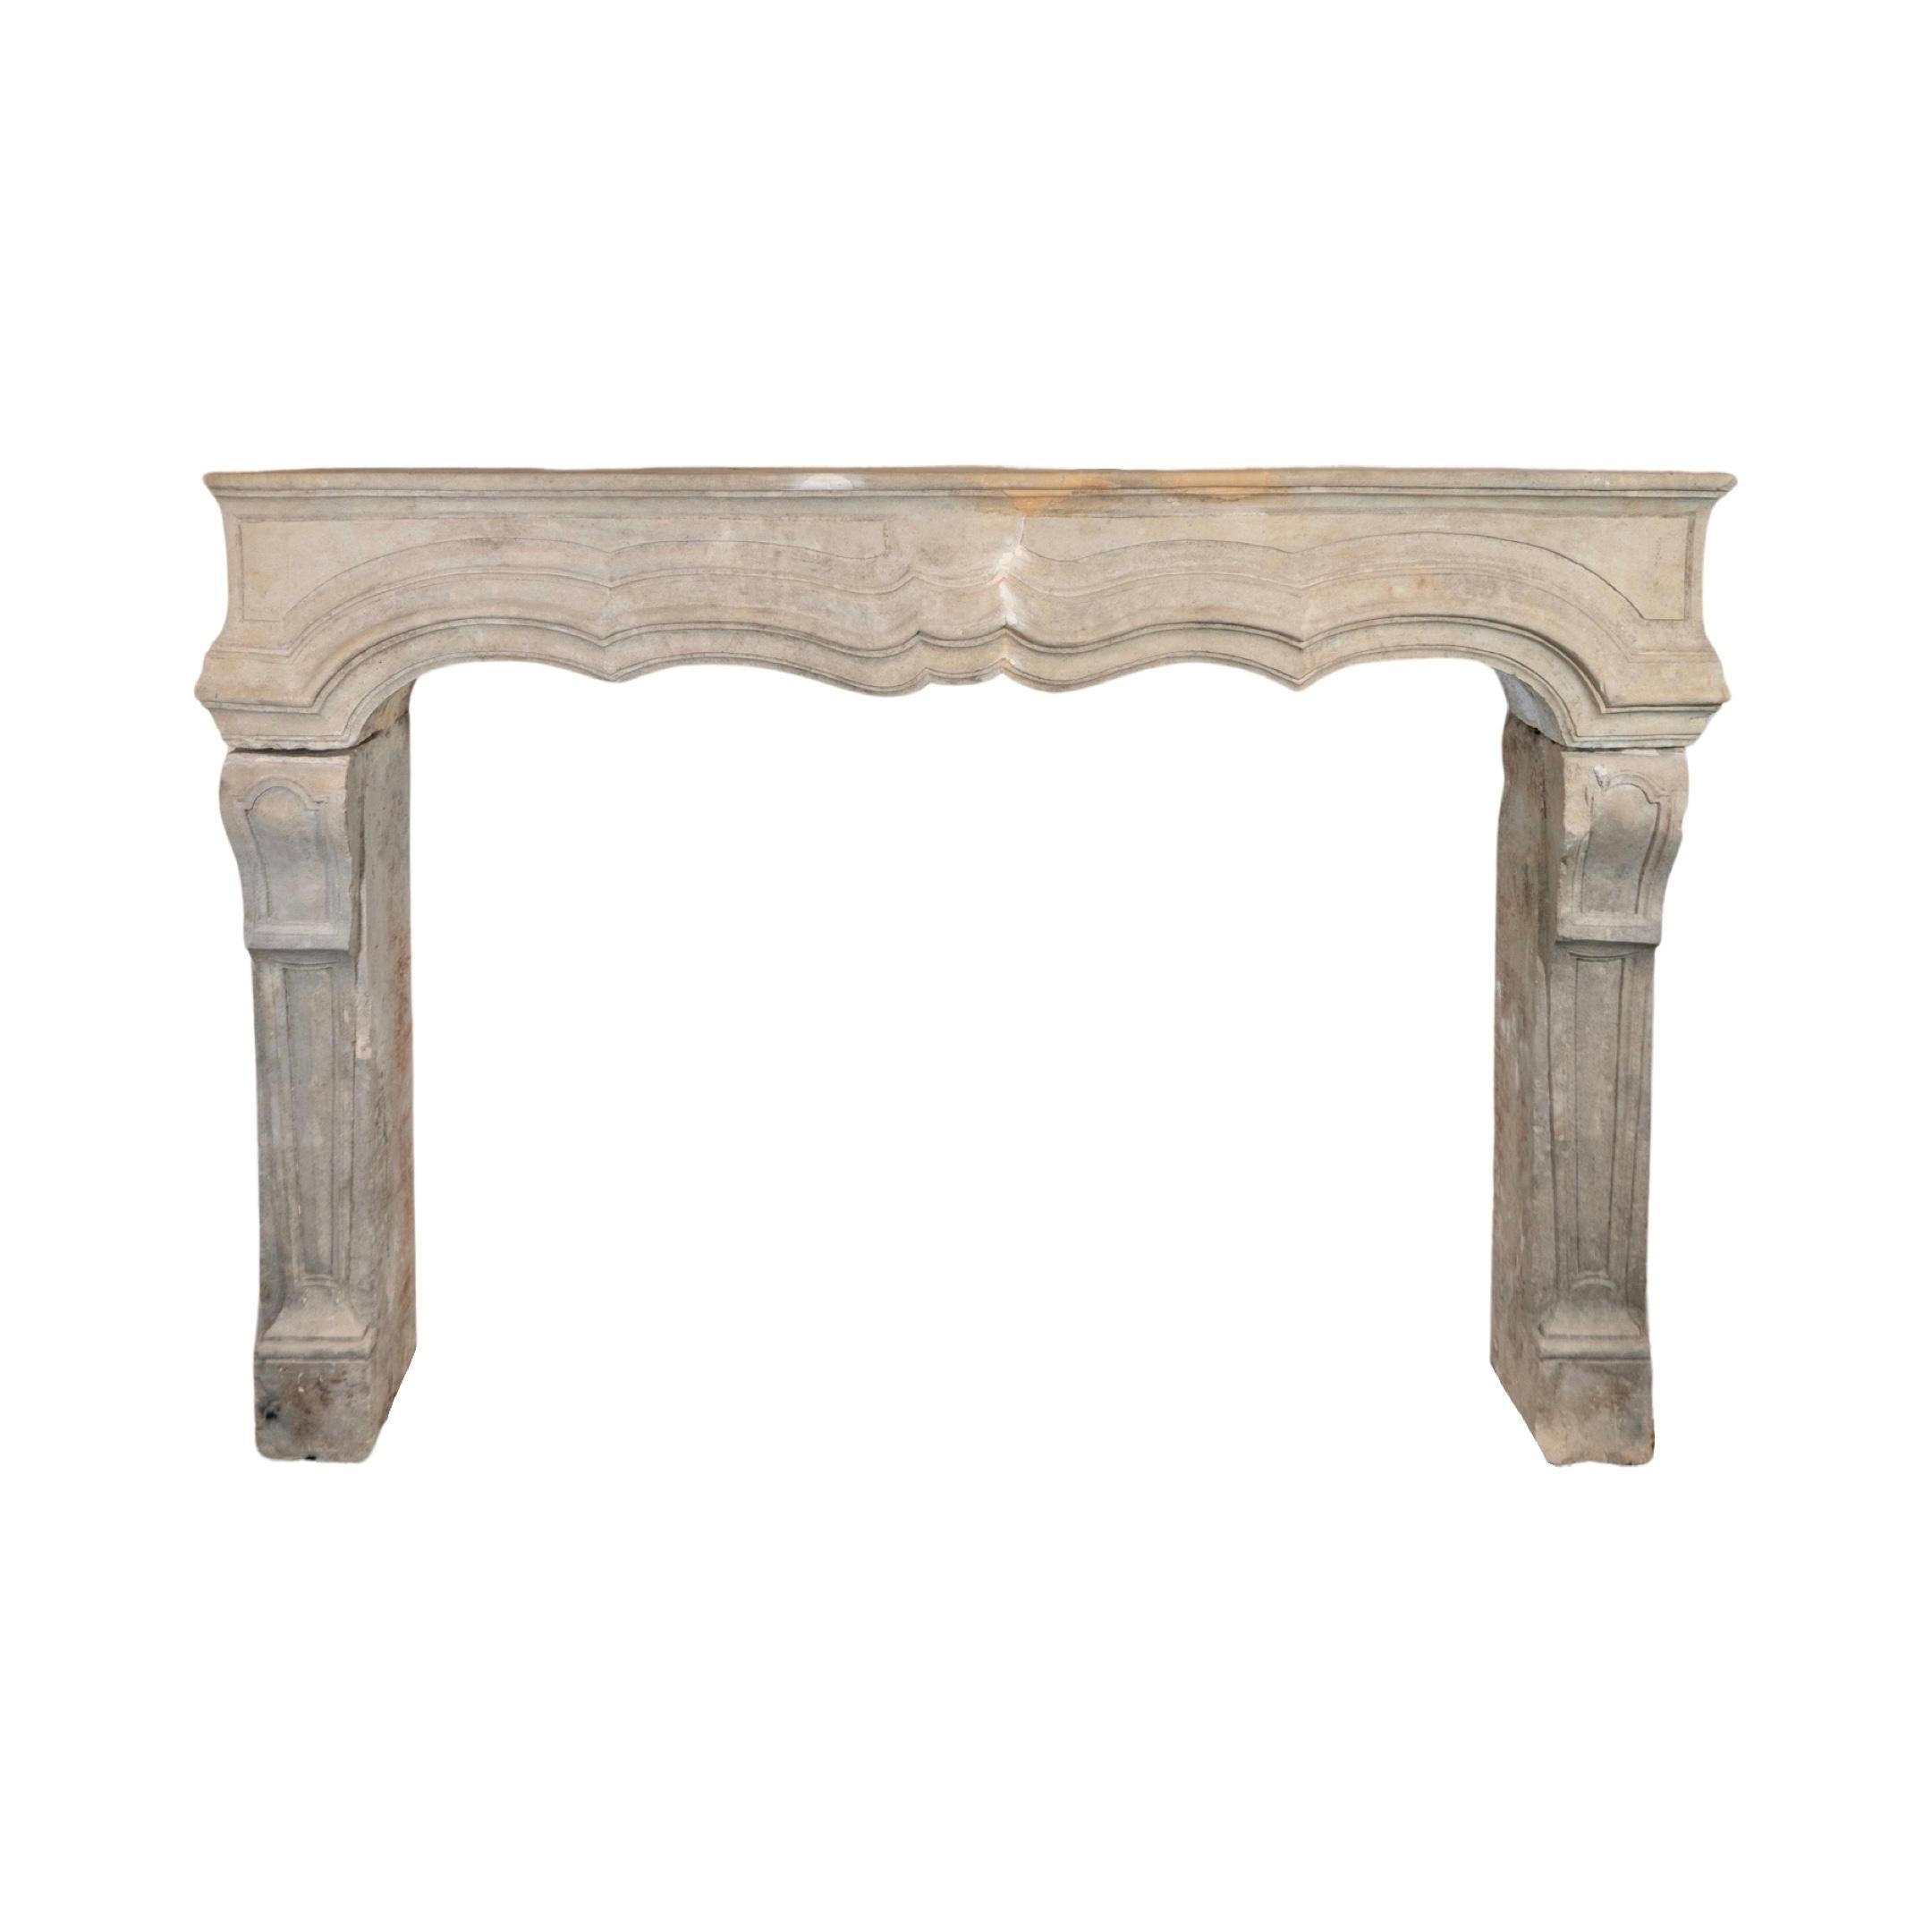 This French Limestone Mantel, originating from the 1780s, showcases elegant Louis the 13th style with intricately crafted line carvings. Made from authentic limestone, it adds a touch of sophistication and charm to any room. Bring a piece of France